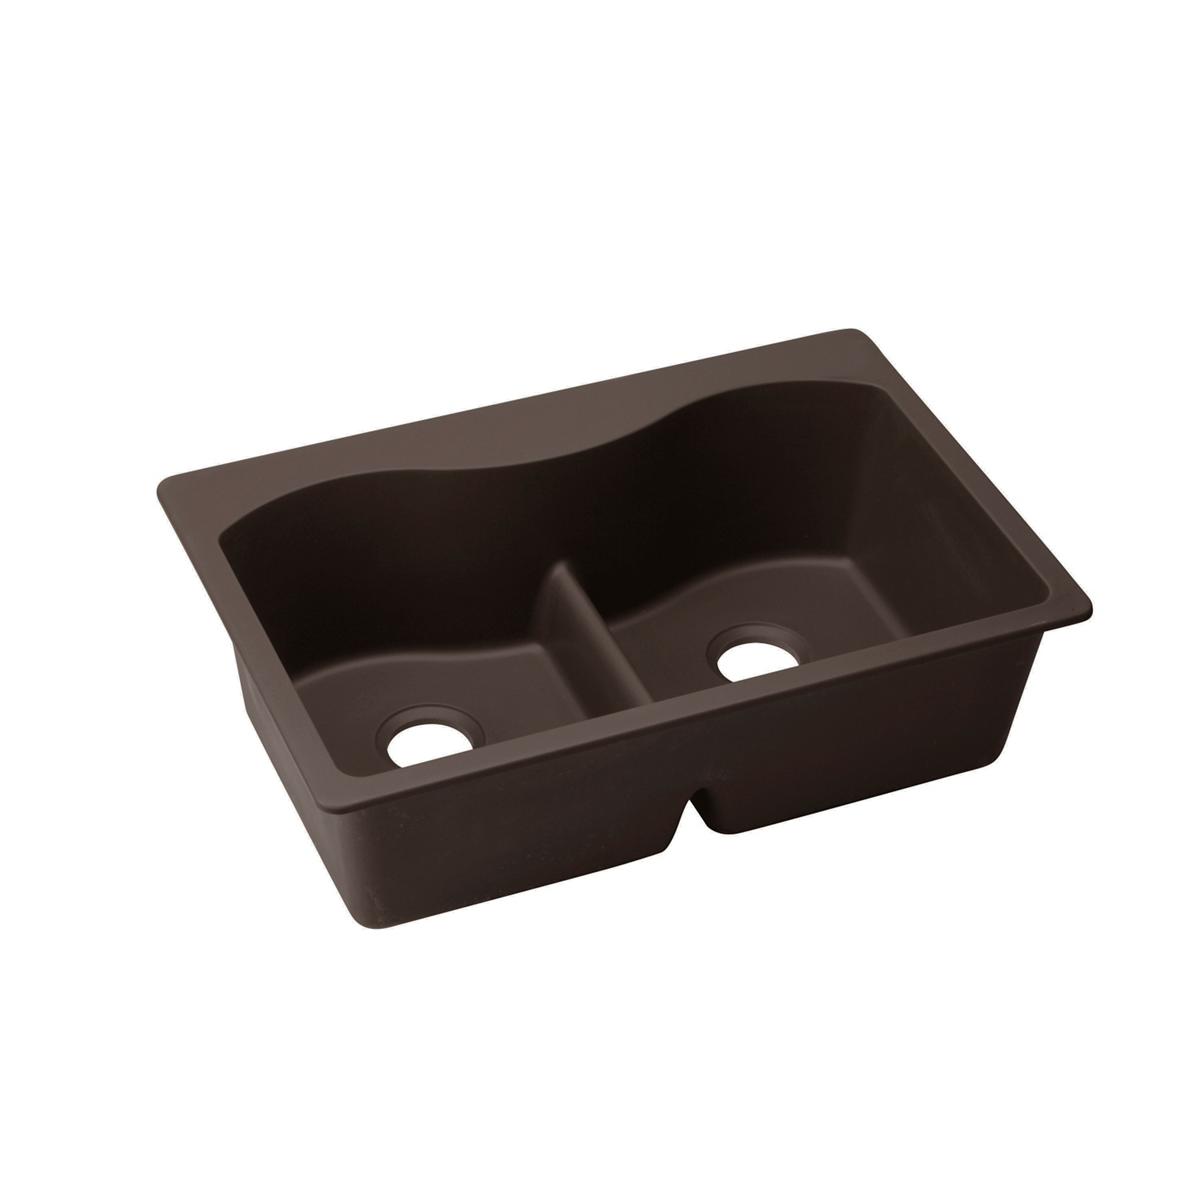 Elkay Quartz Luxe 33" x 22" x 9-1/2", Equal Double Bowl Drop-in Sink with Aqua Divide, Chestnut